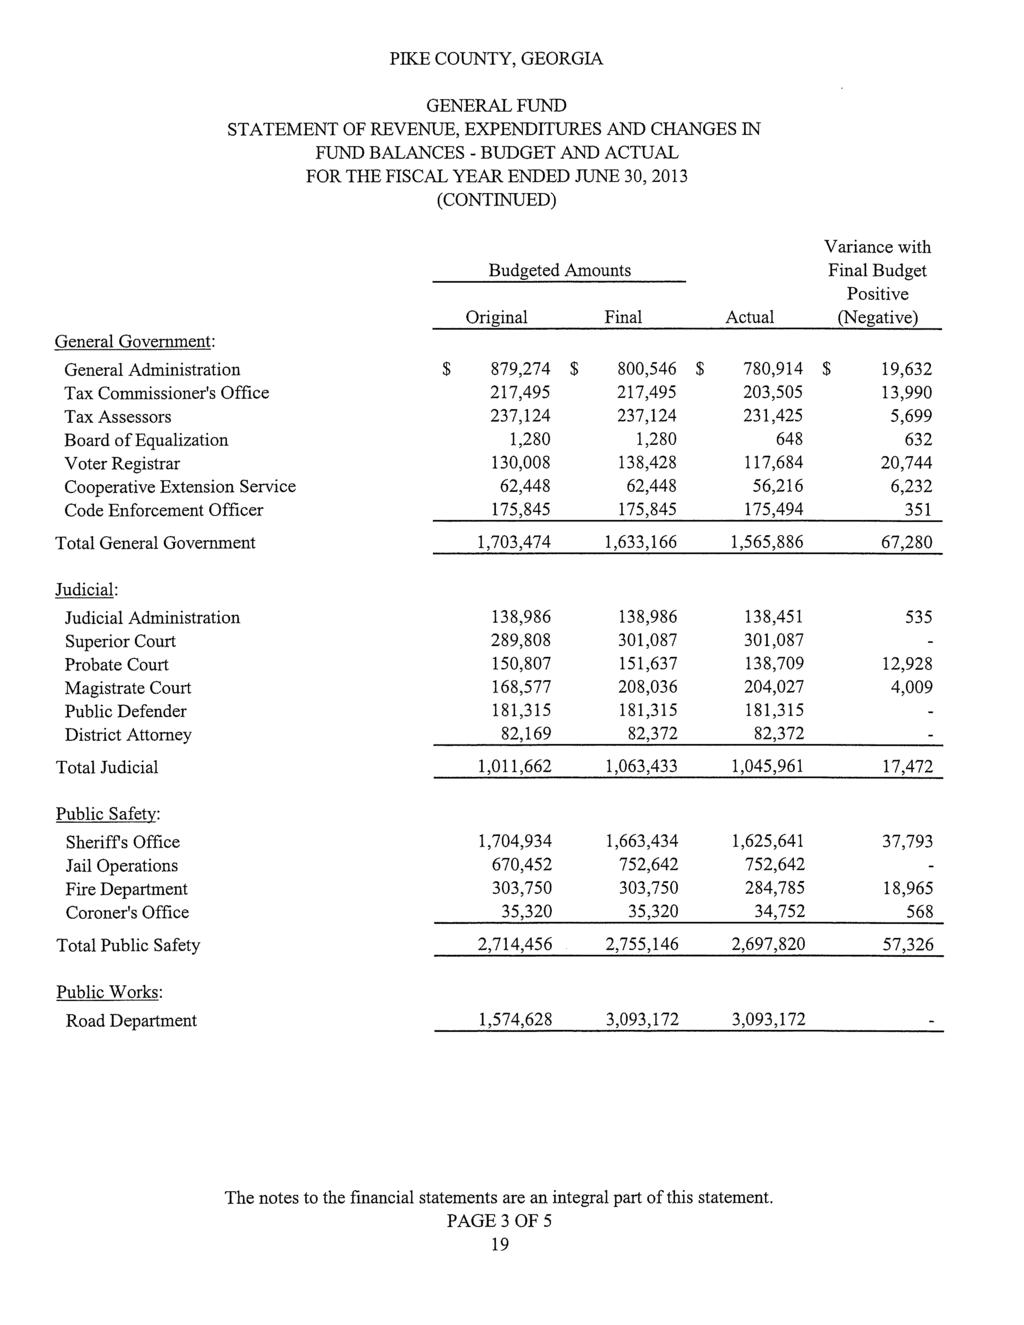 Pll(E COUNTY, GEORGIA GENERAL FUND STATEMENT OF REVENUE, EXPENDITURES AND CHANGES IN FUND BALANCES - BUDGET AND ACTUAL FOR THE FISCAL YEAR ENDED JUNE 30, 2013 (CONTINUED) General Government: General